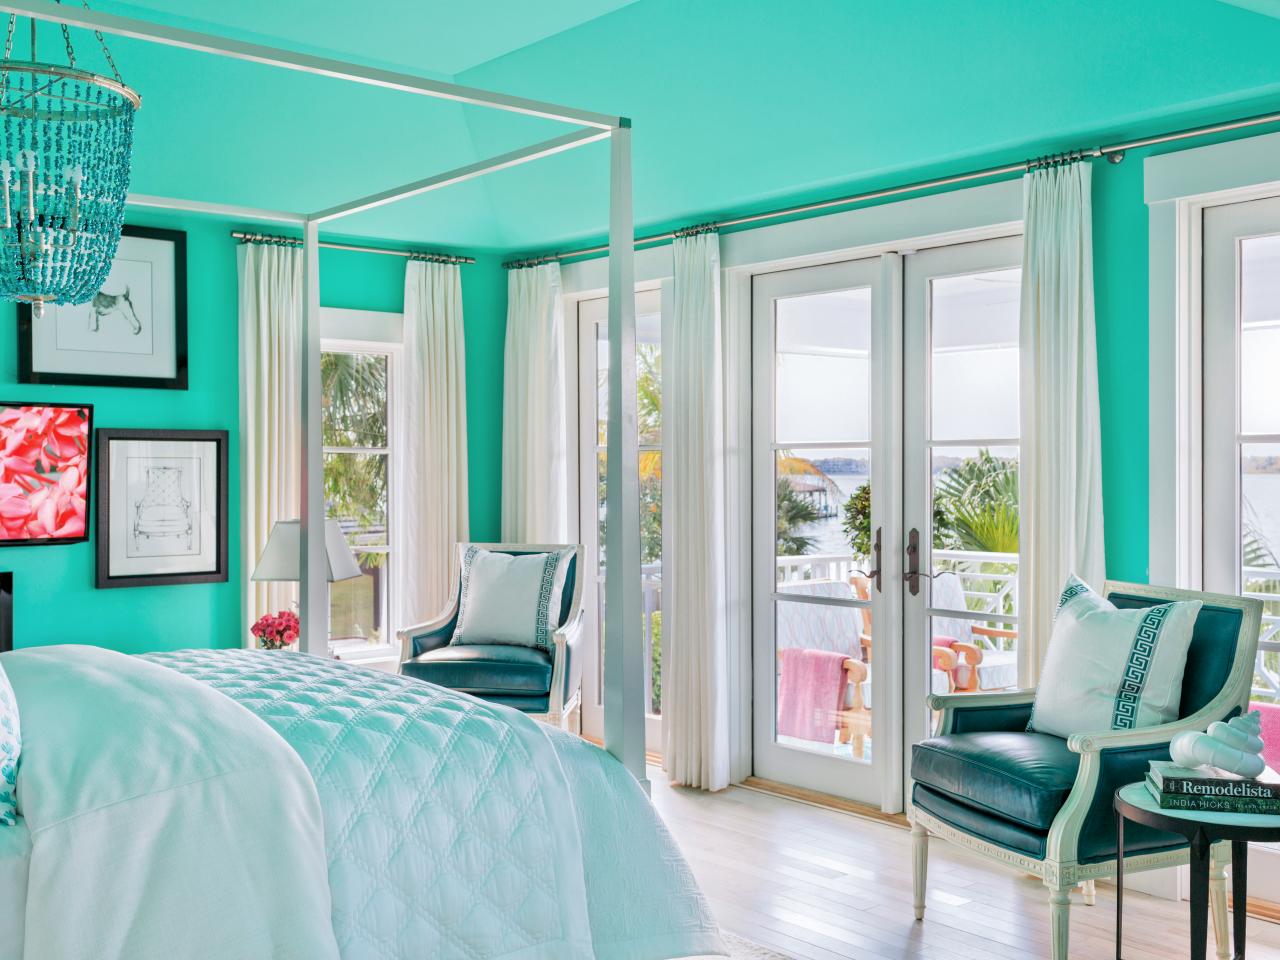 5 Coastal iBedroomsi That Will Get You Ready for Vacation 